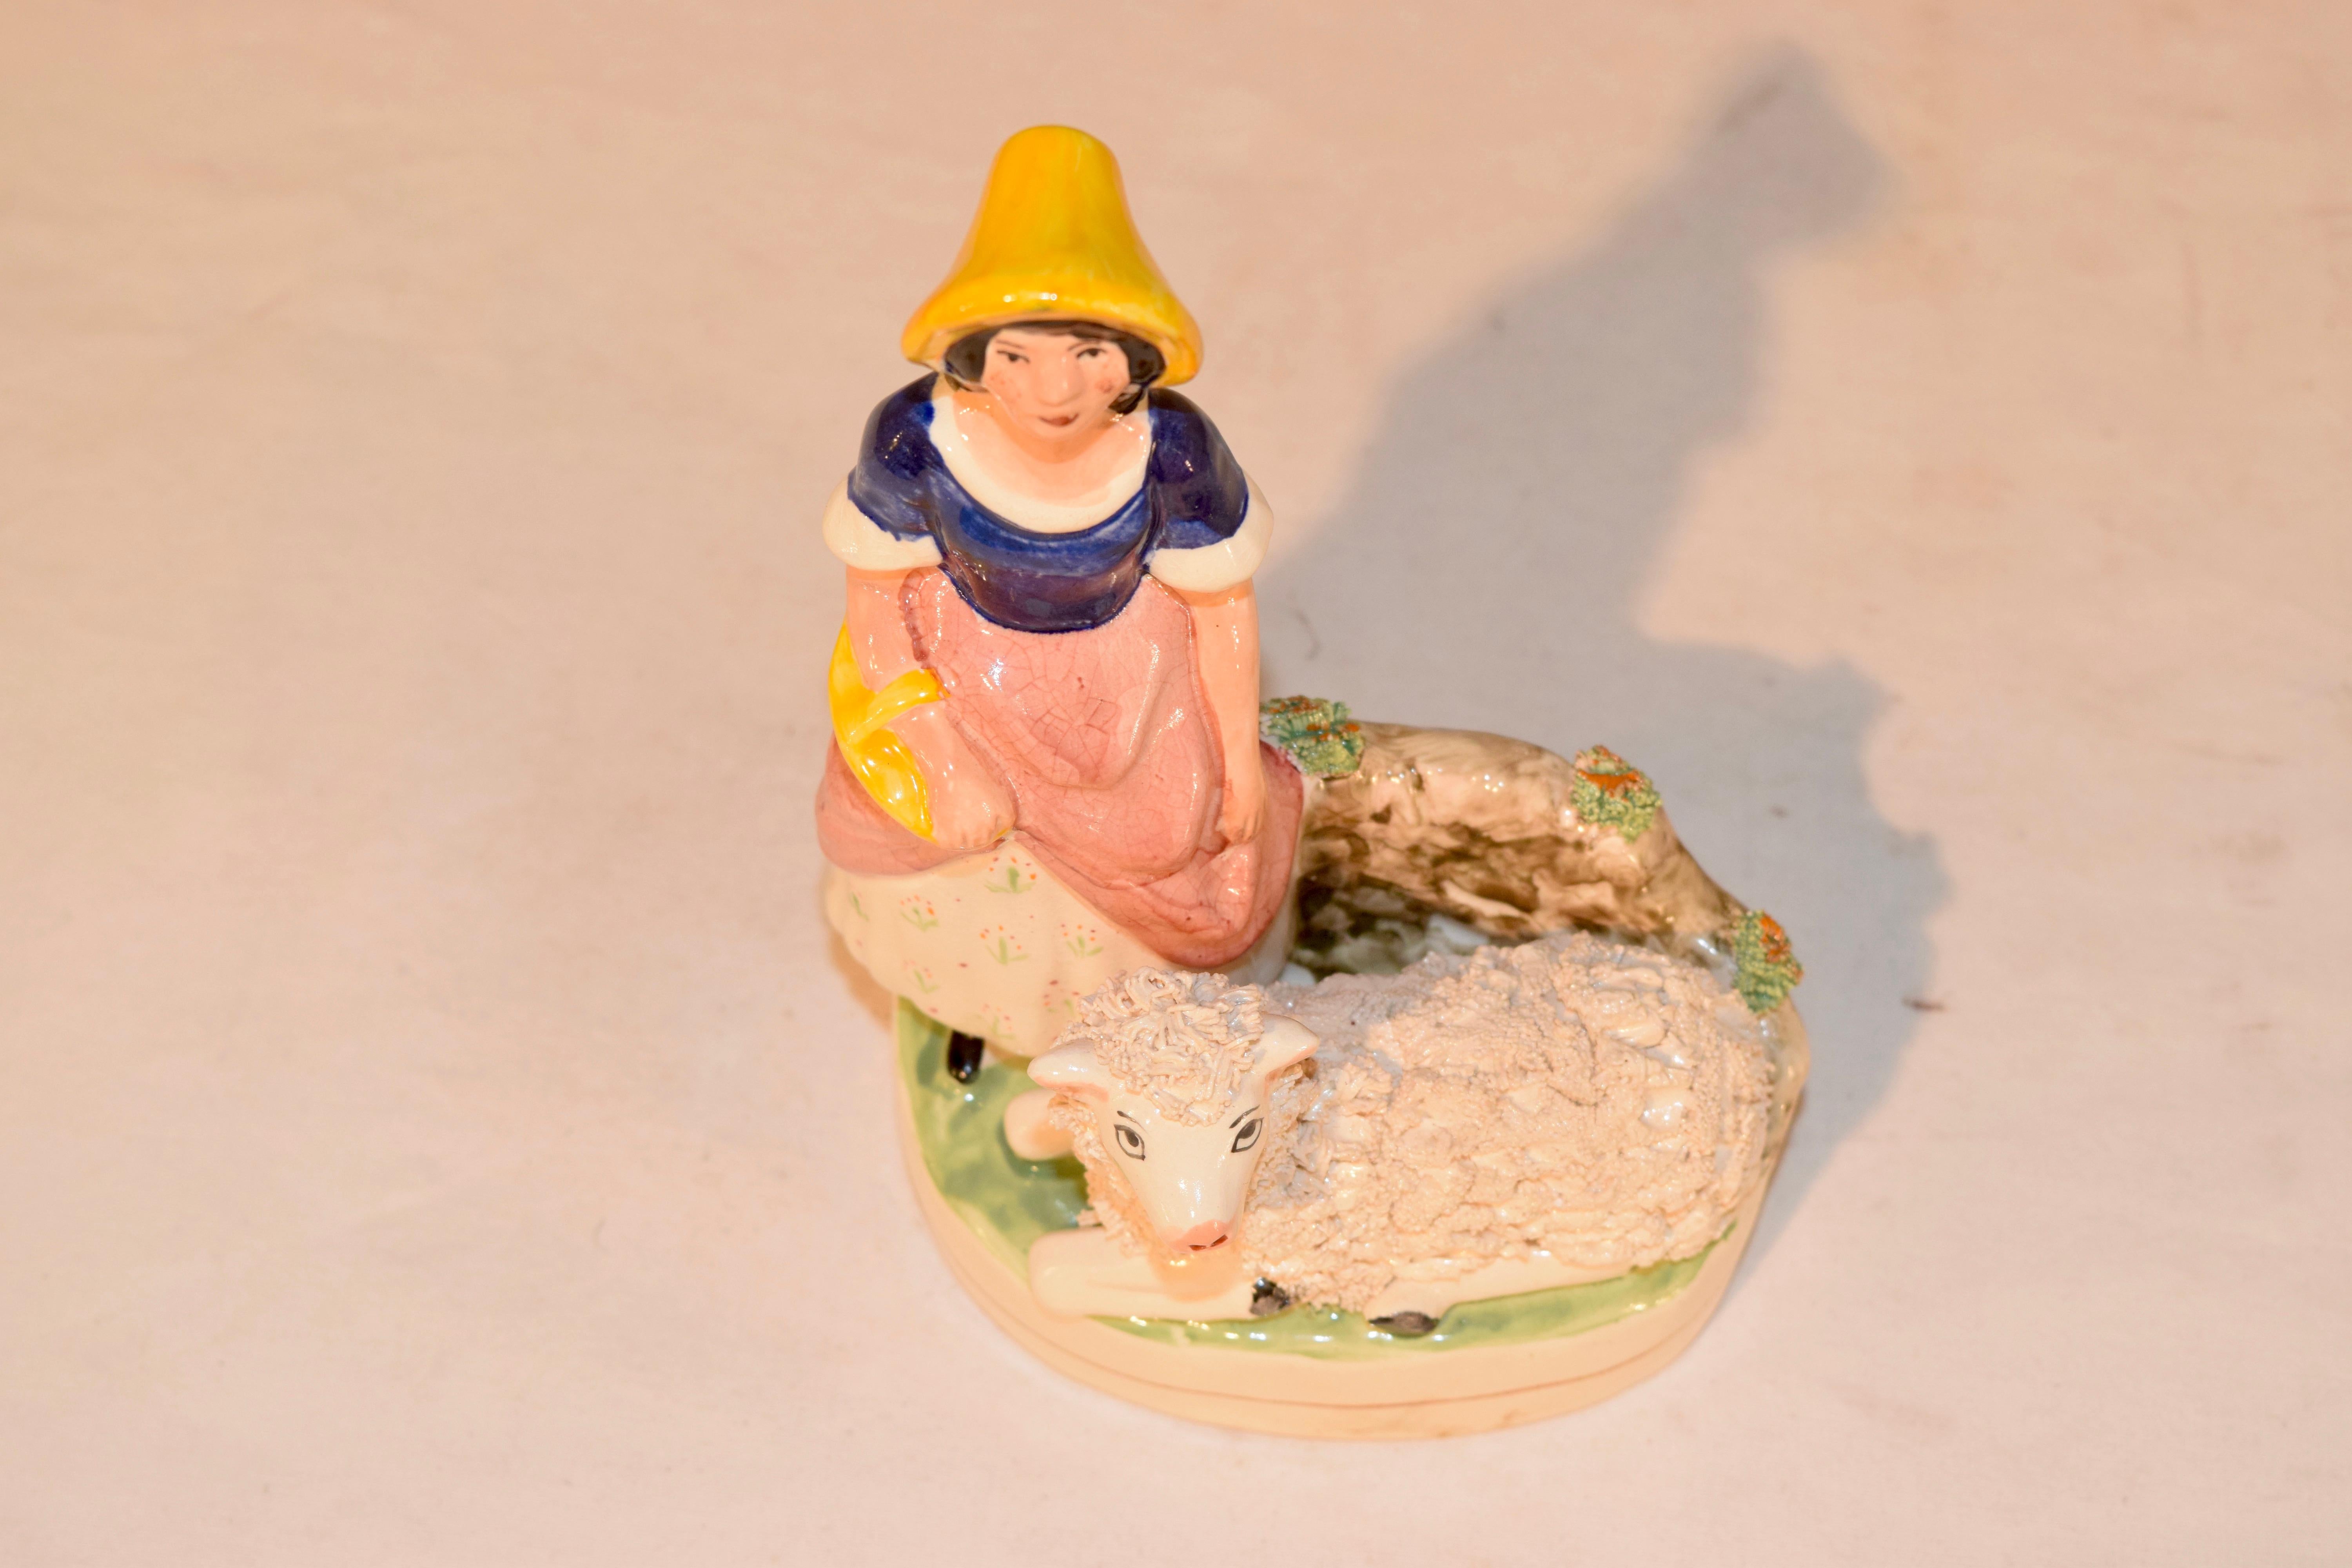 Wonderful hand made Staffordshire figurine from England of a lady and a lamb. The lamb is lying in front on the grass with the lady behind him with what appears to be a basket on her arm and a yellow hat. Lovely form.